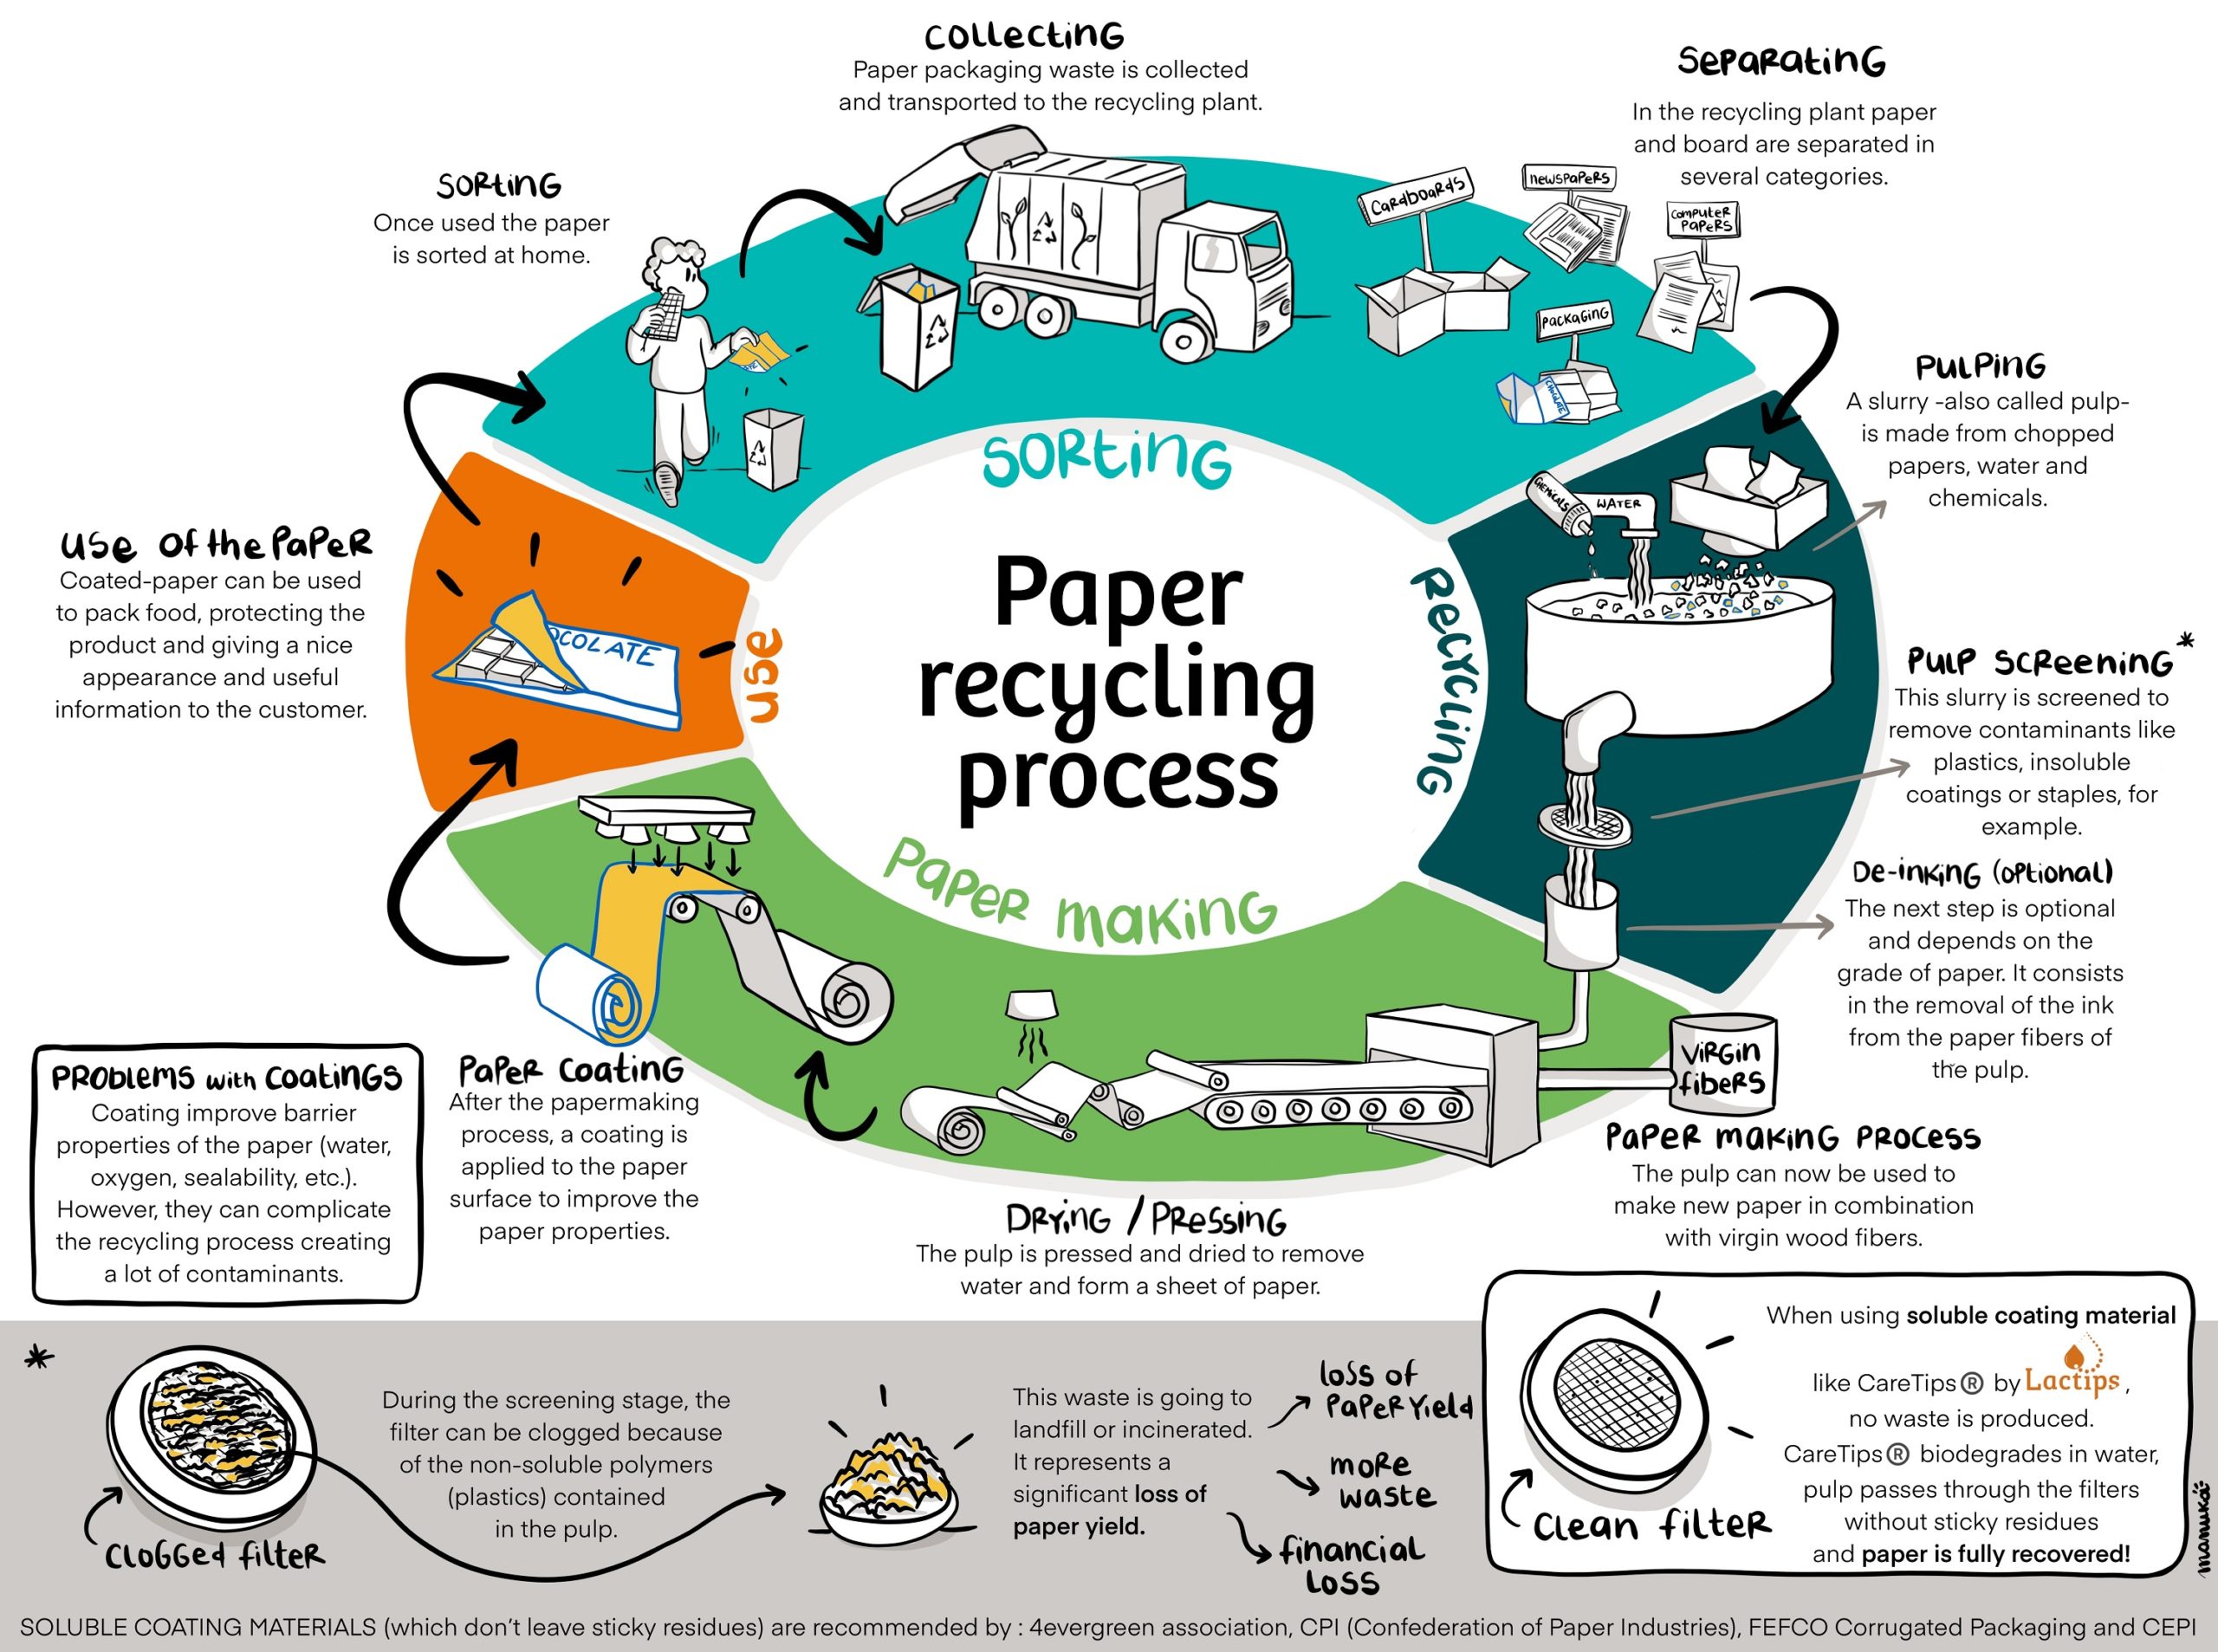 The paper recycling process and how to make your own recycled paper